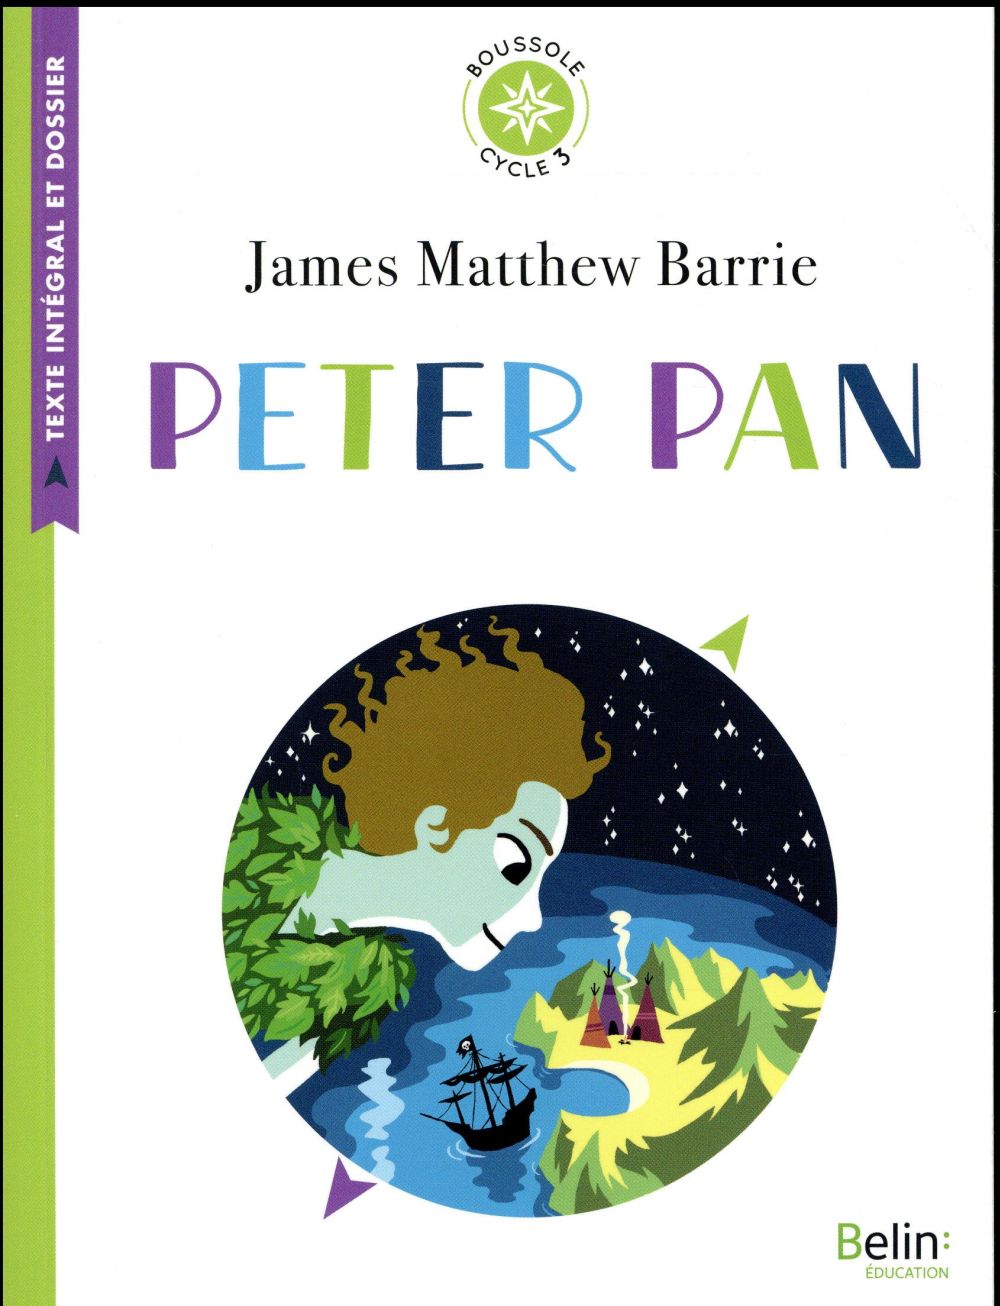 PETER PAN - BOUSSOLE CYCLE 3